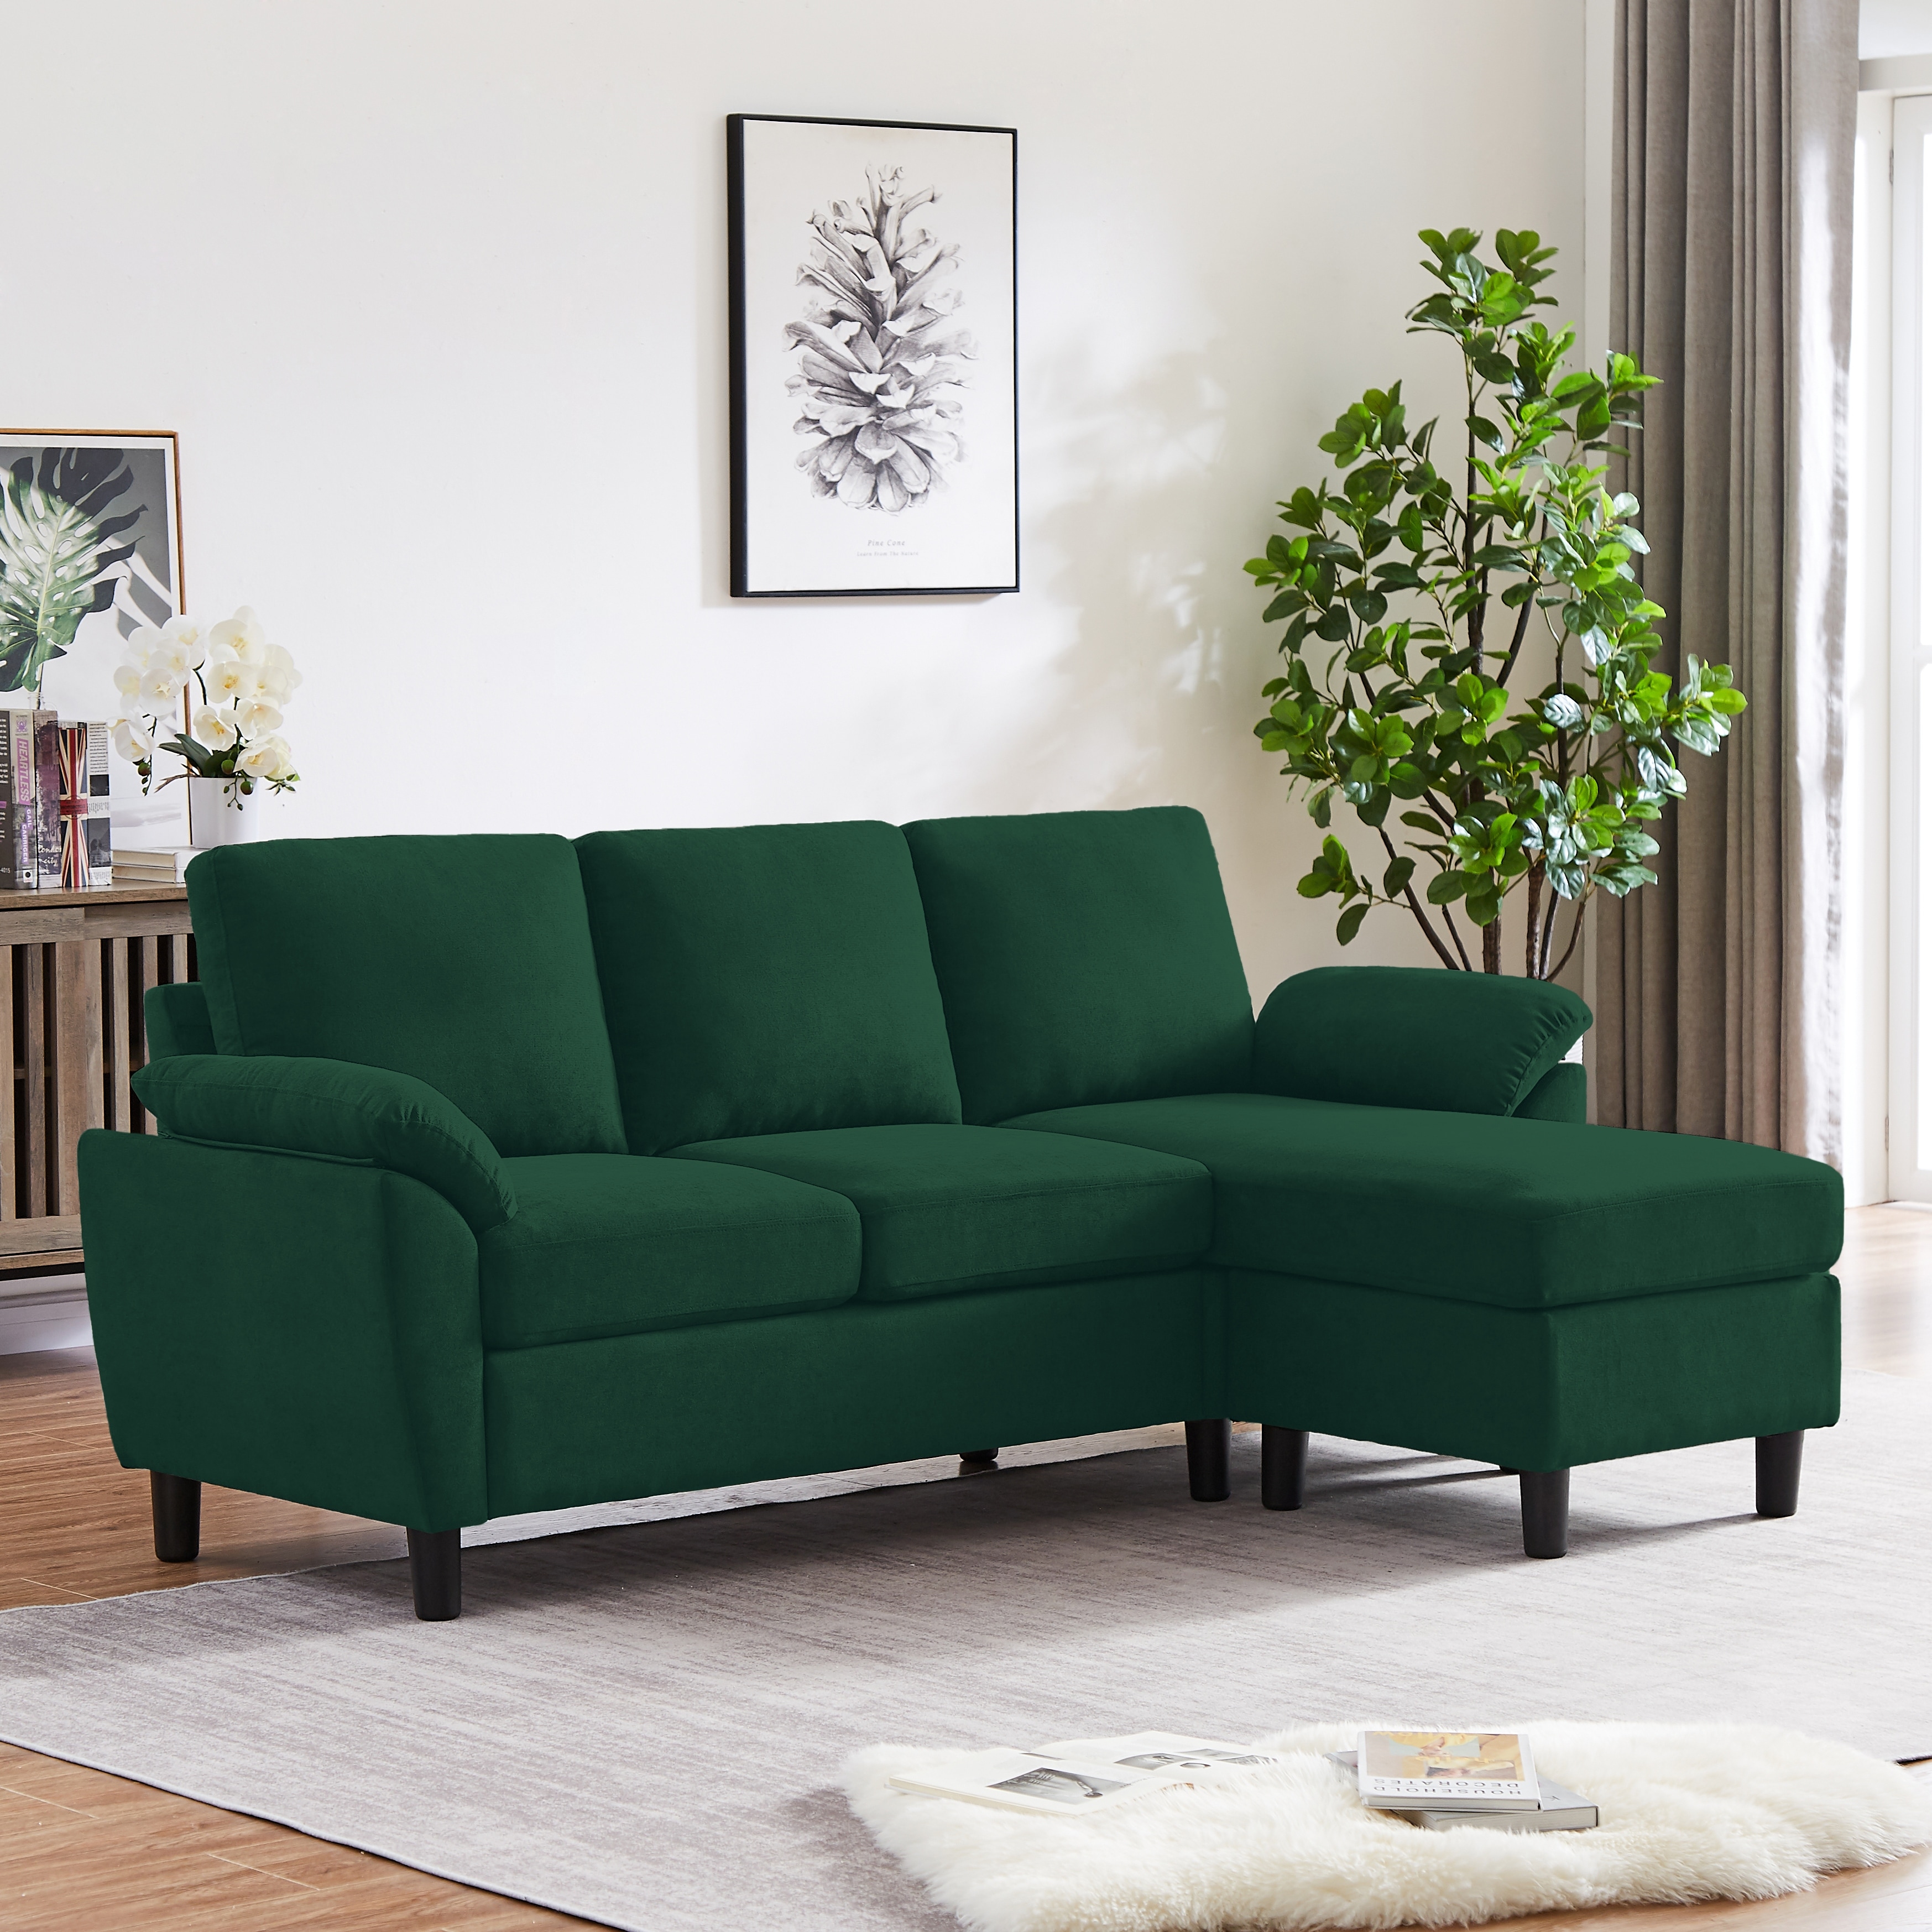 https://ak1.ostkcdn.com/images/products/is/images/direct/07da32a11350fac4987c0b1ed3ea6a4ee825d06a/Jarenie-Sofa-Couch-Upholstered-L-Shape-Sectional-Sofas-Sets-for-Living-Room.jpg